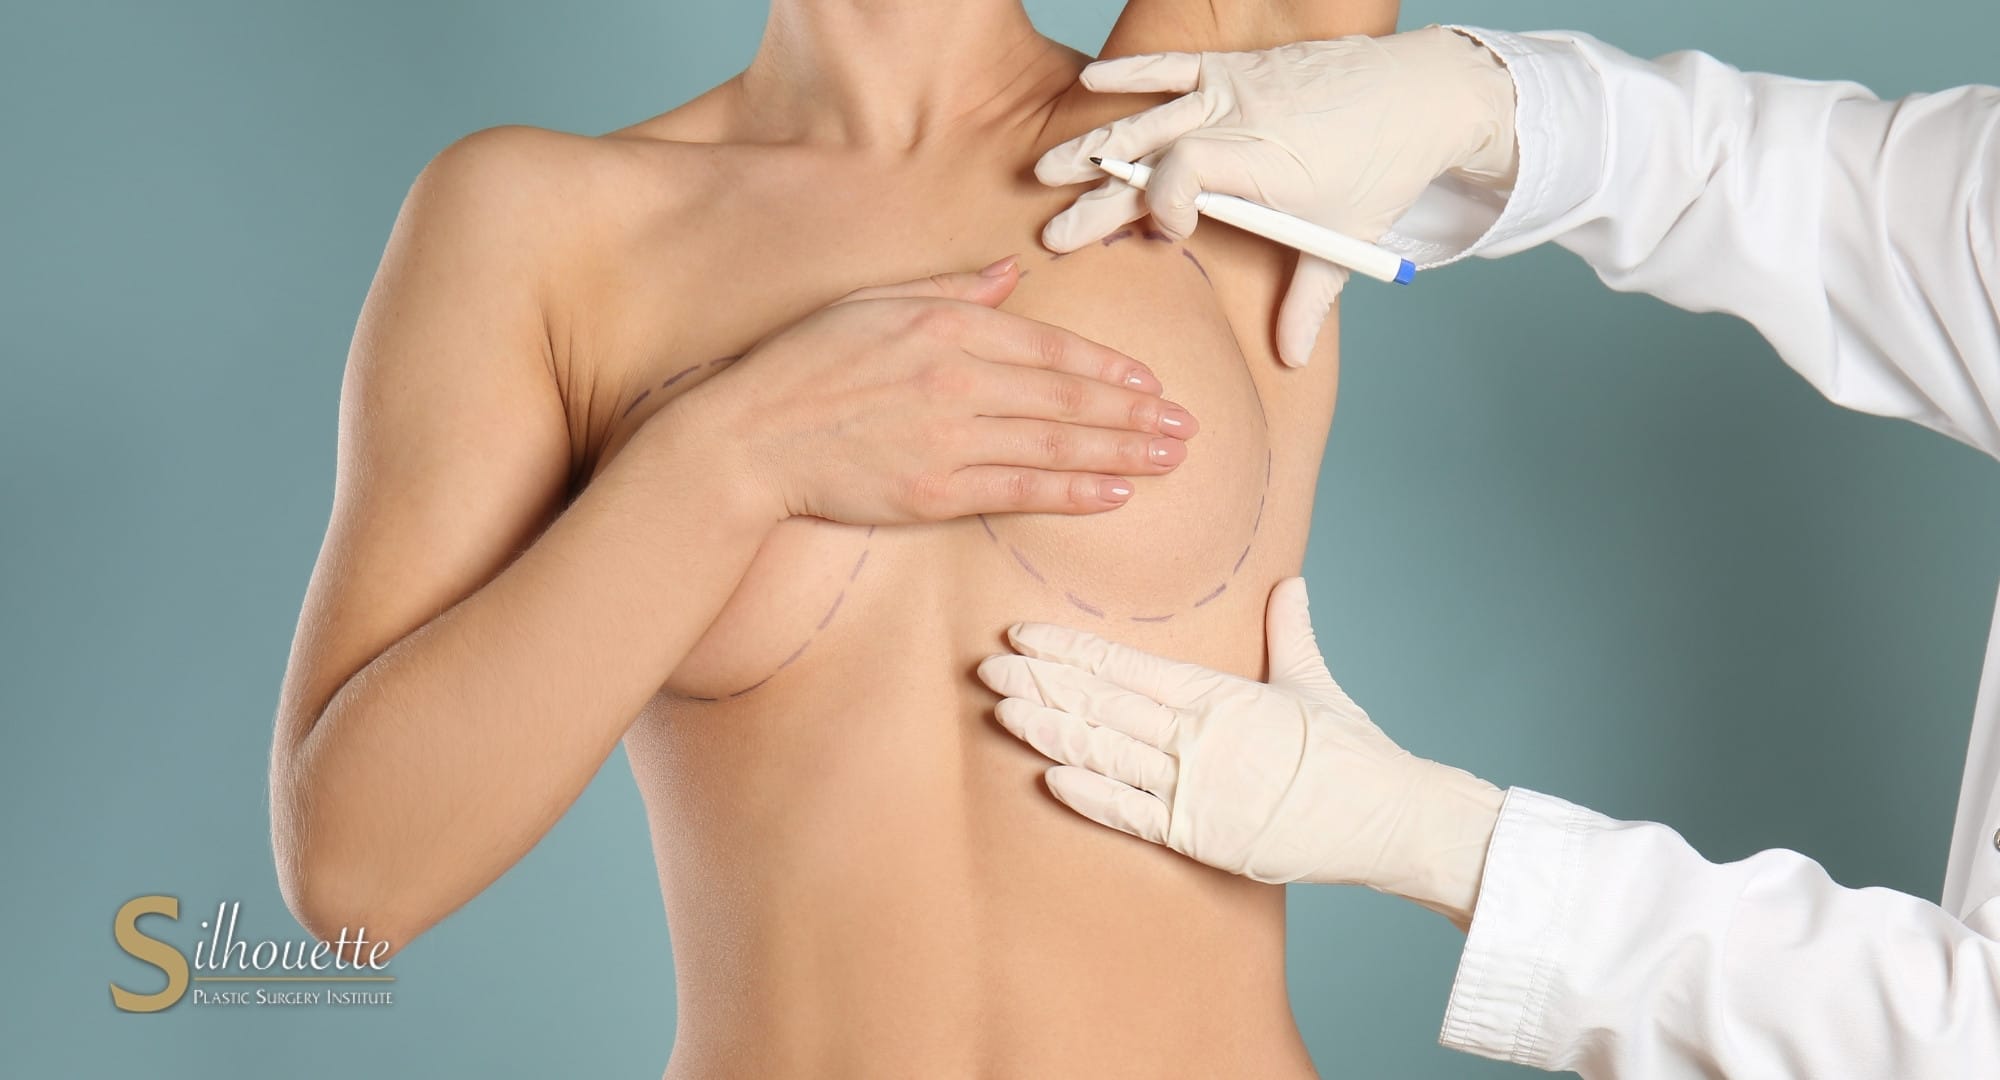 How Long Does a Breast Reduction Surgery Take?